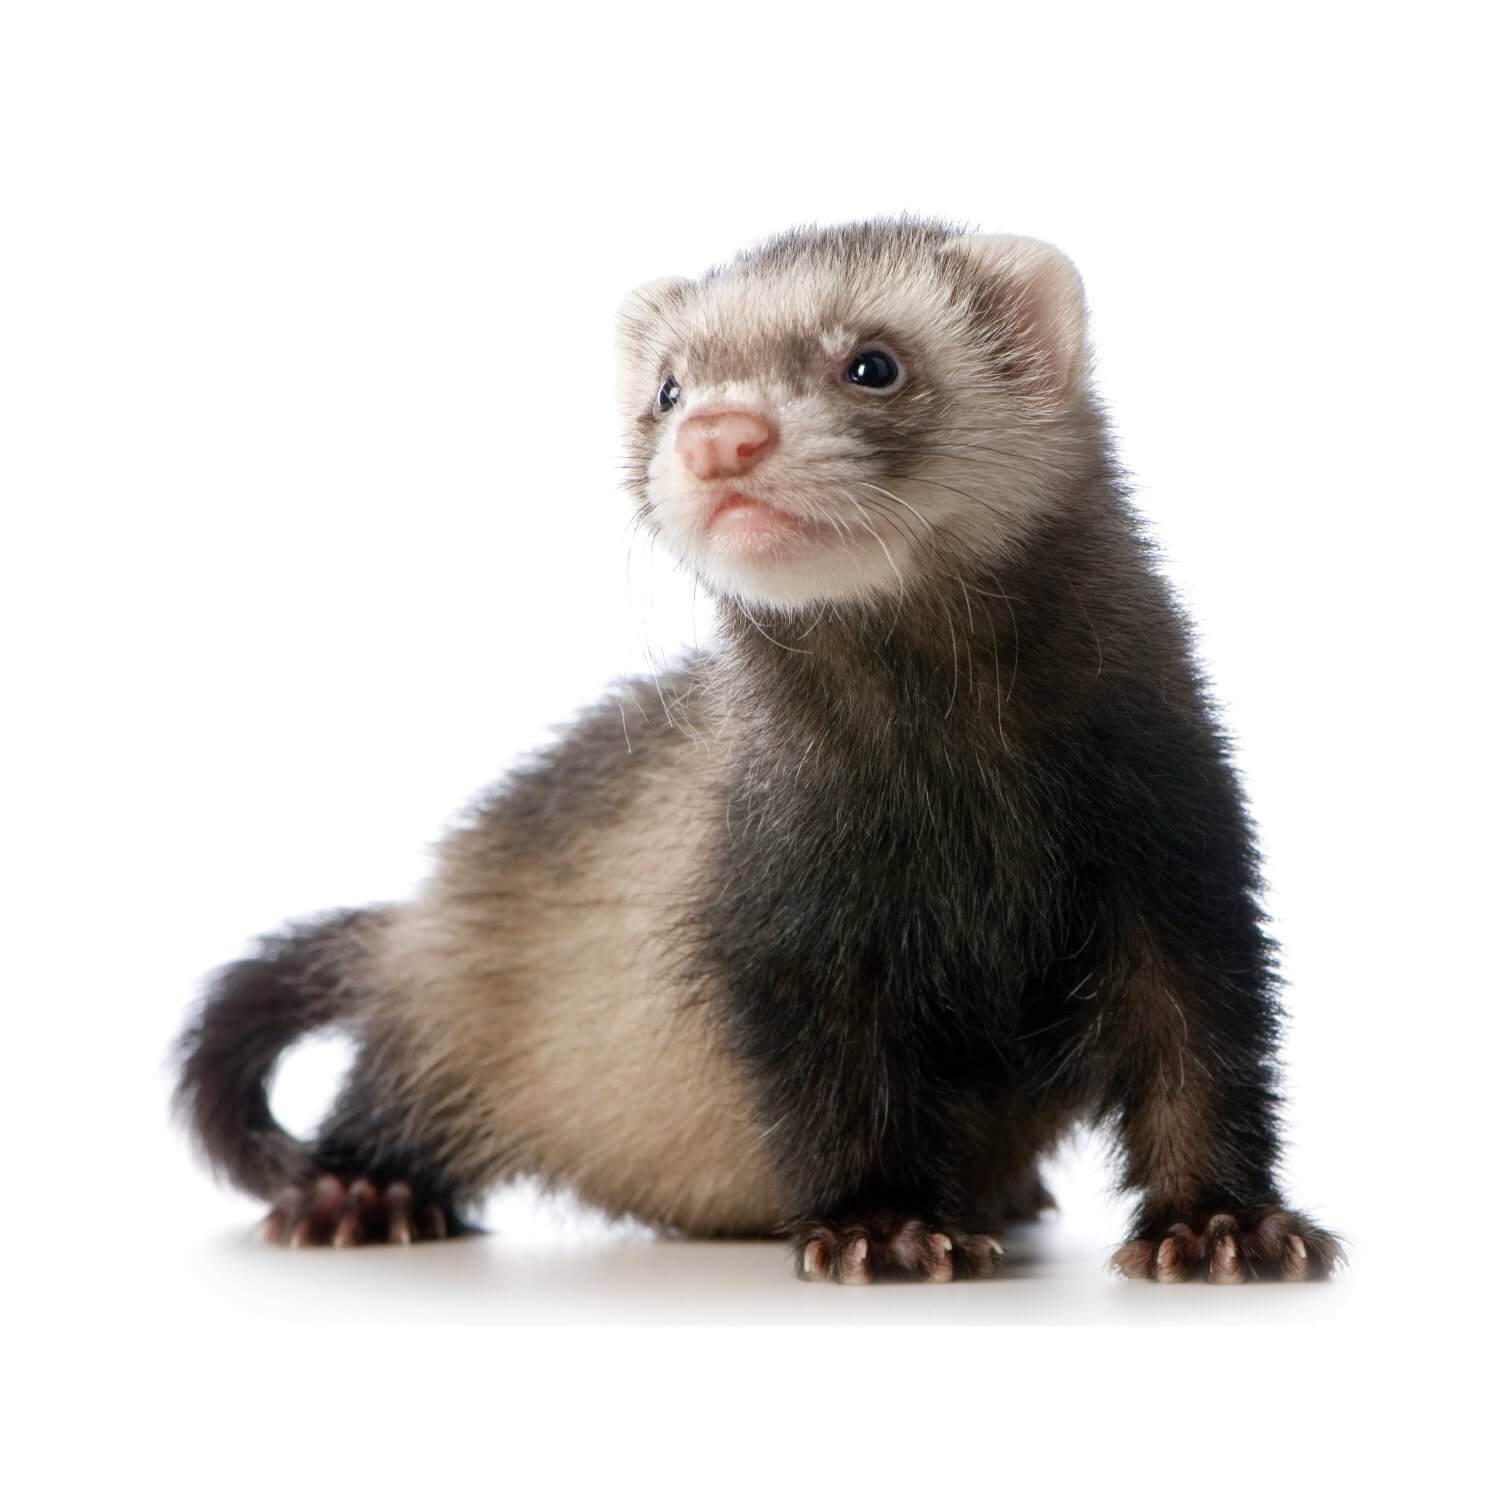 Ferrets - Everything you need to know! - Baldivis Vet Hospital